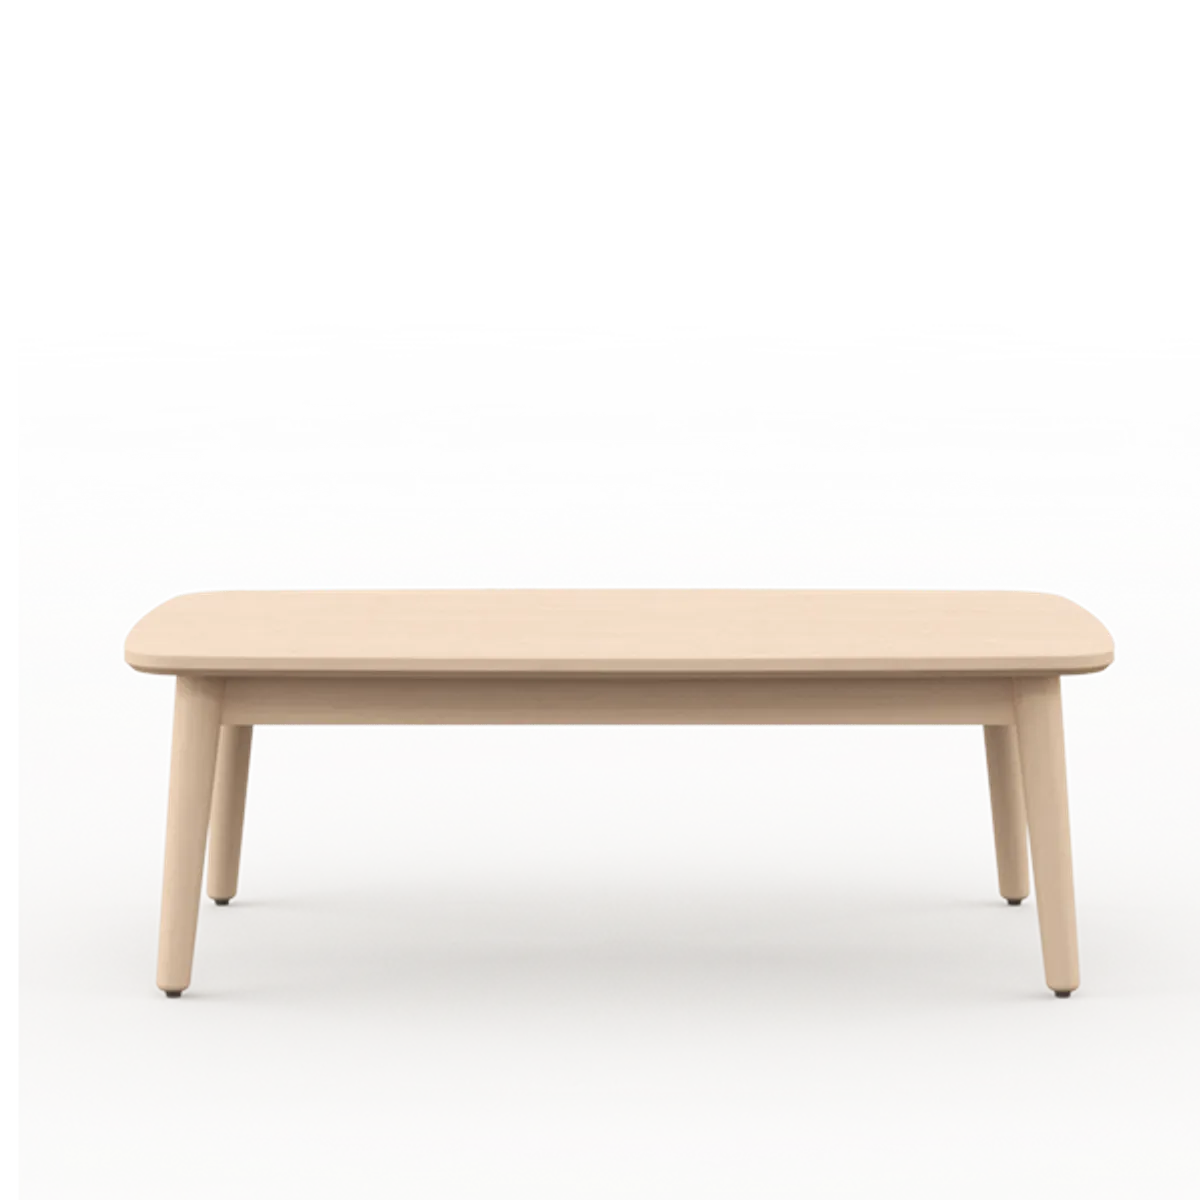 Minki Coffee Low Table Exclusive To Inside Out Contracts